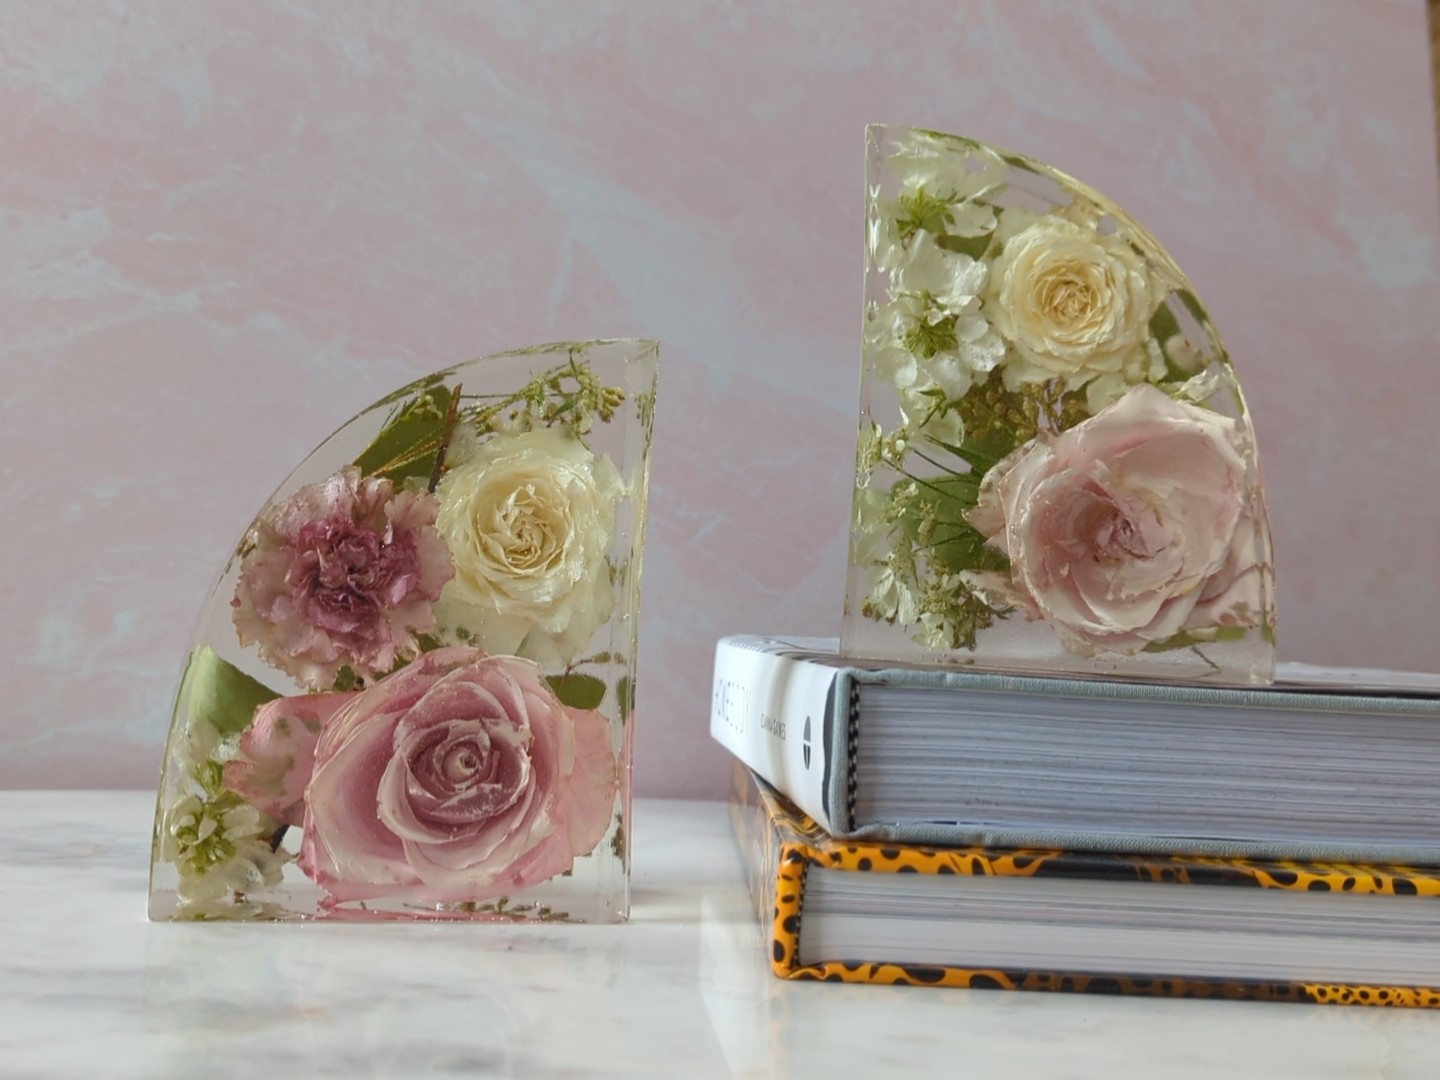 5 Small Preserved Flower Bookends